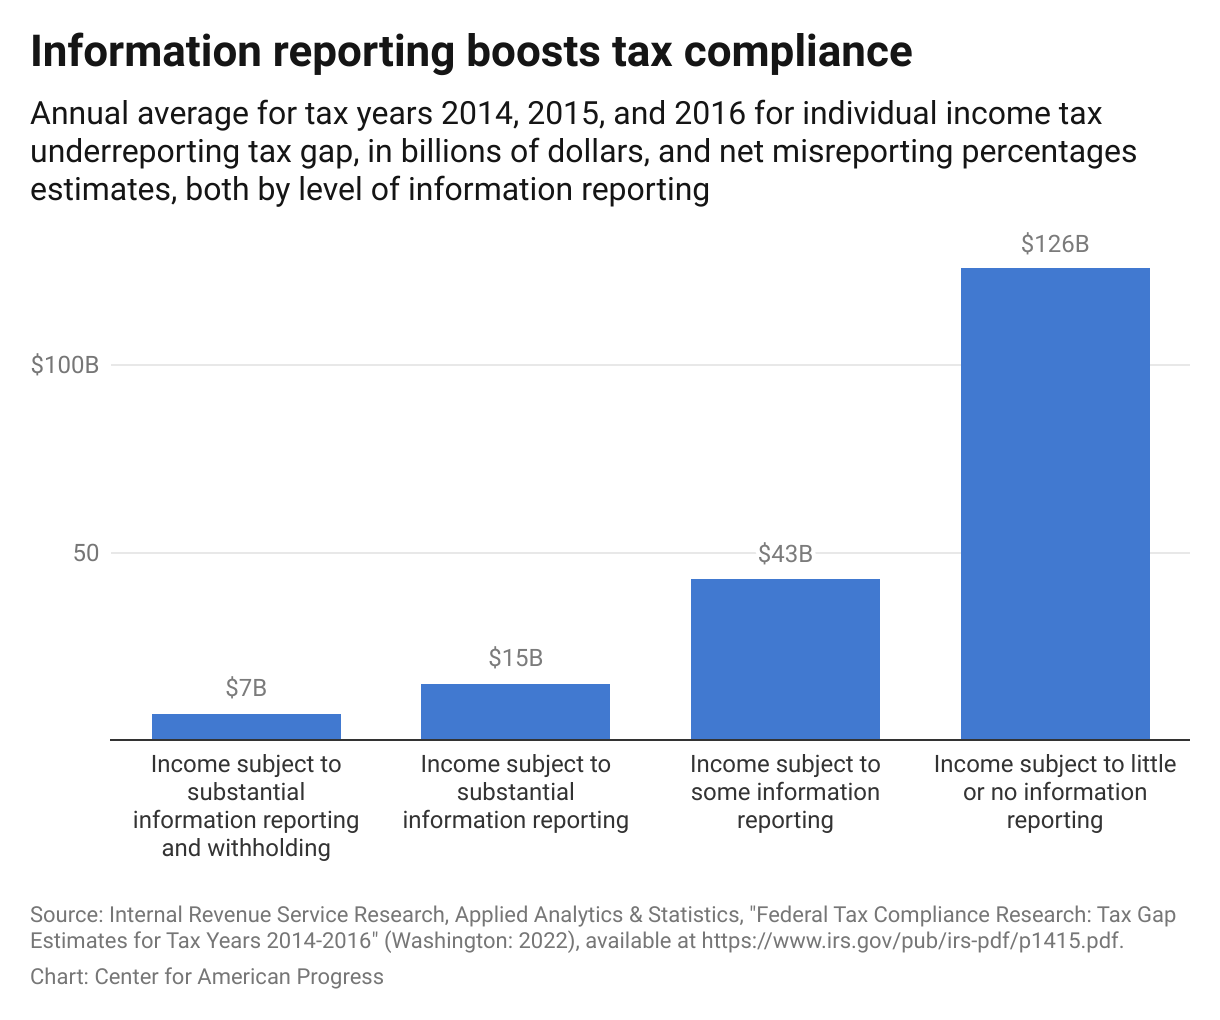 Column chart showing the percentage of income misreporting information reporting level by amount of information reporting required, as well as the resulting tax gap in billions of dollars.